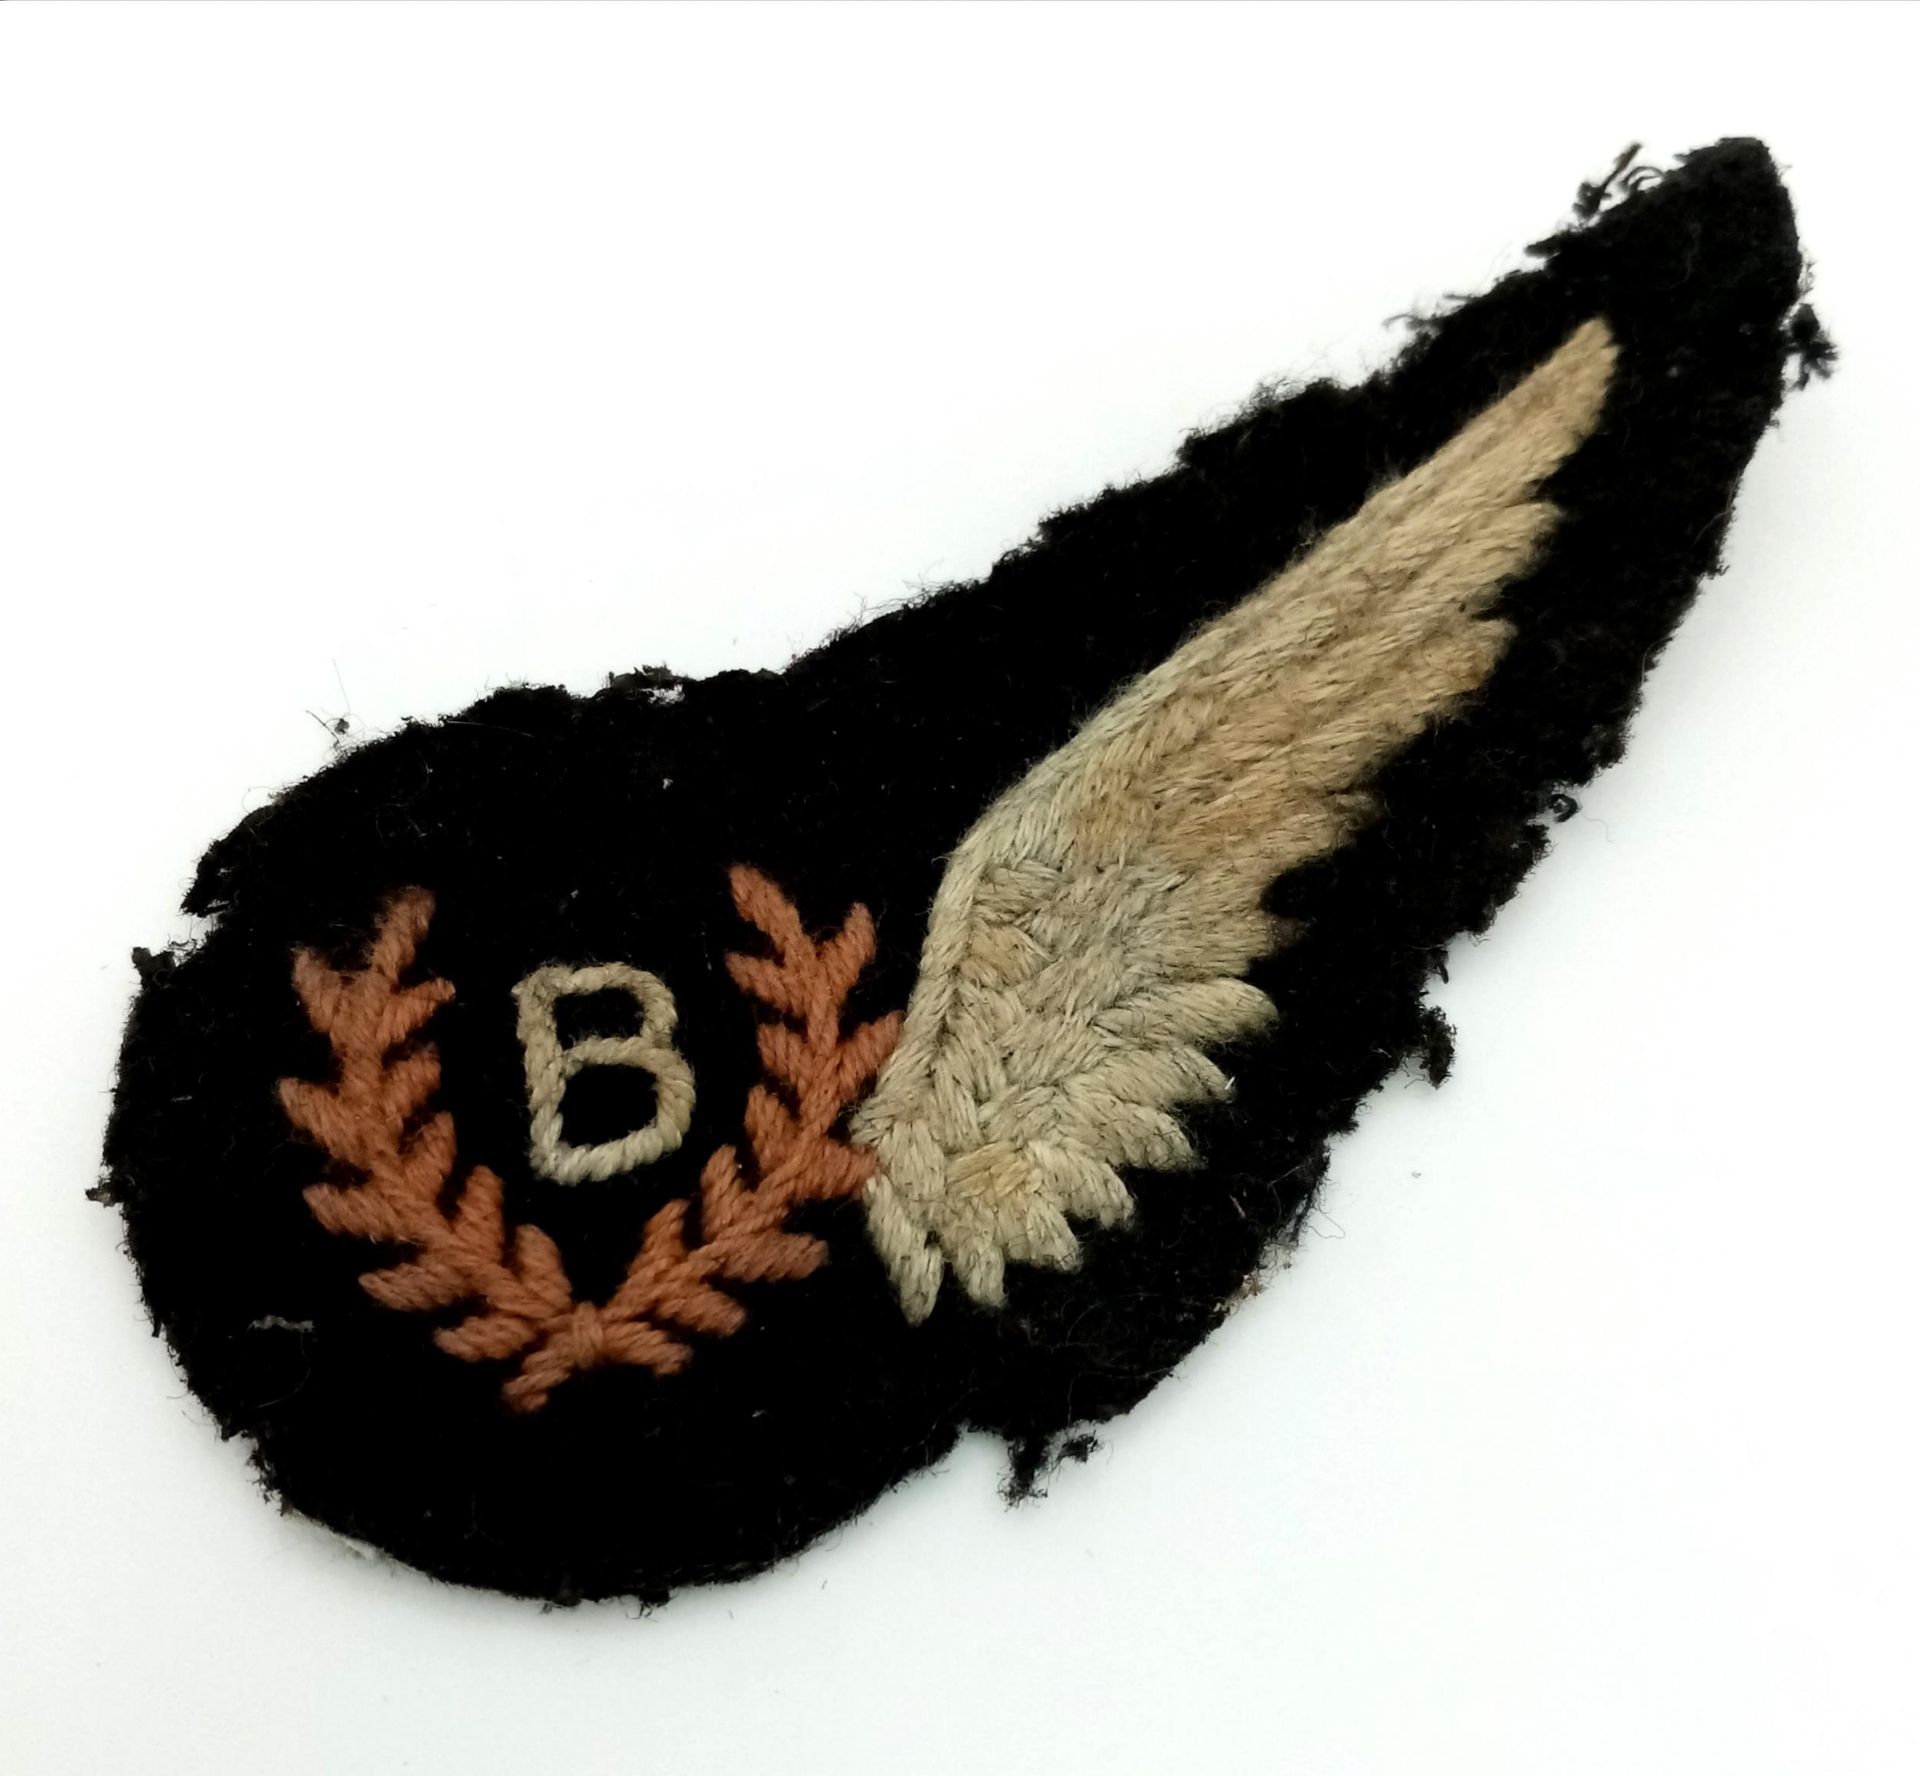 Original WW2 RAF Bomb Aimers Brevet Wings. Flat type badge. Has been removed from a uniform.